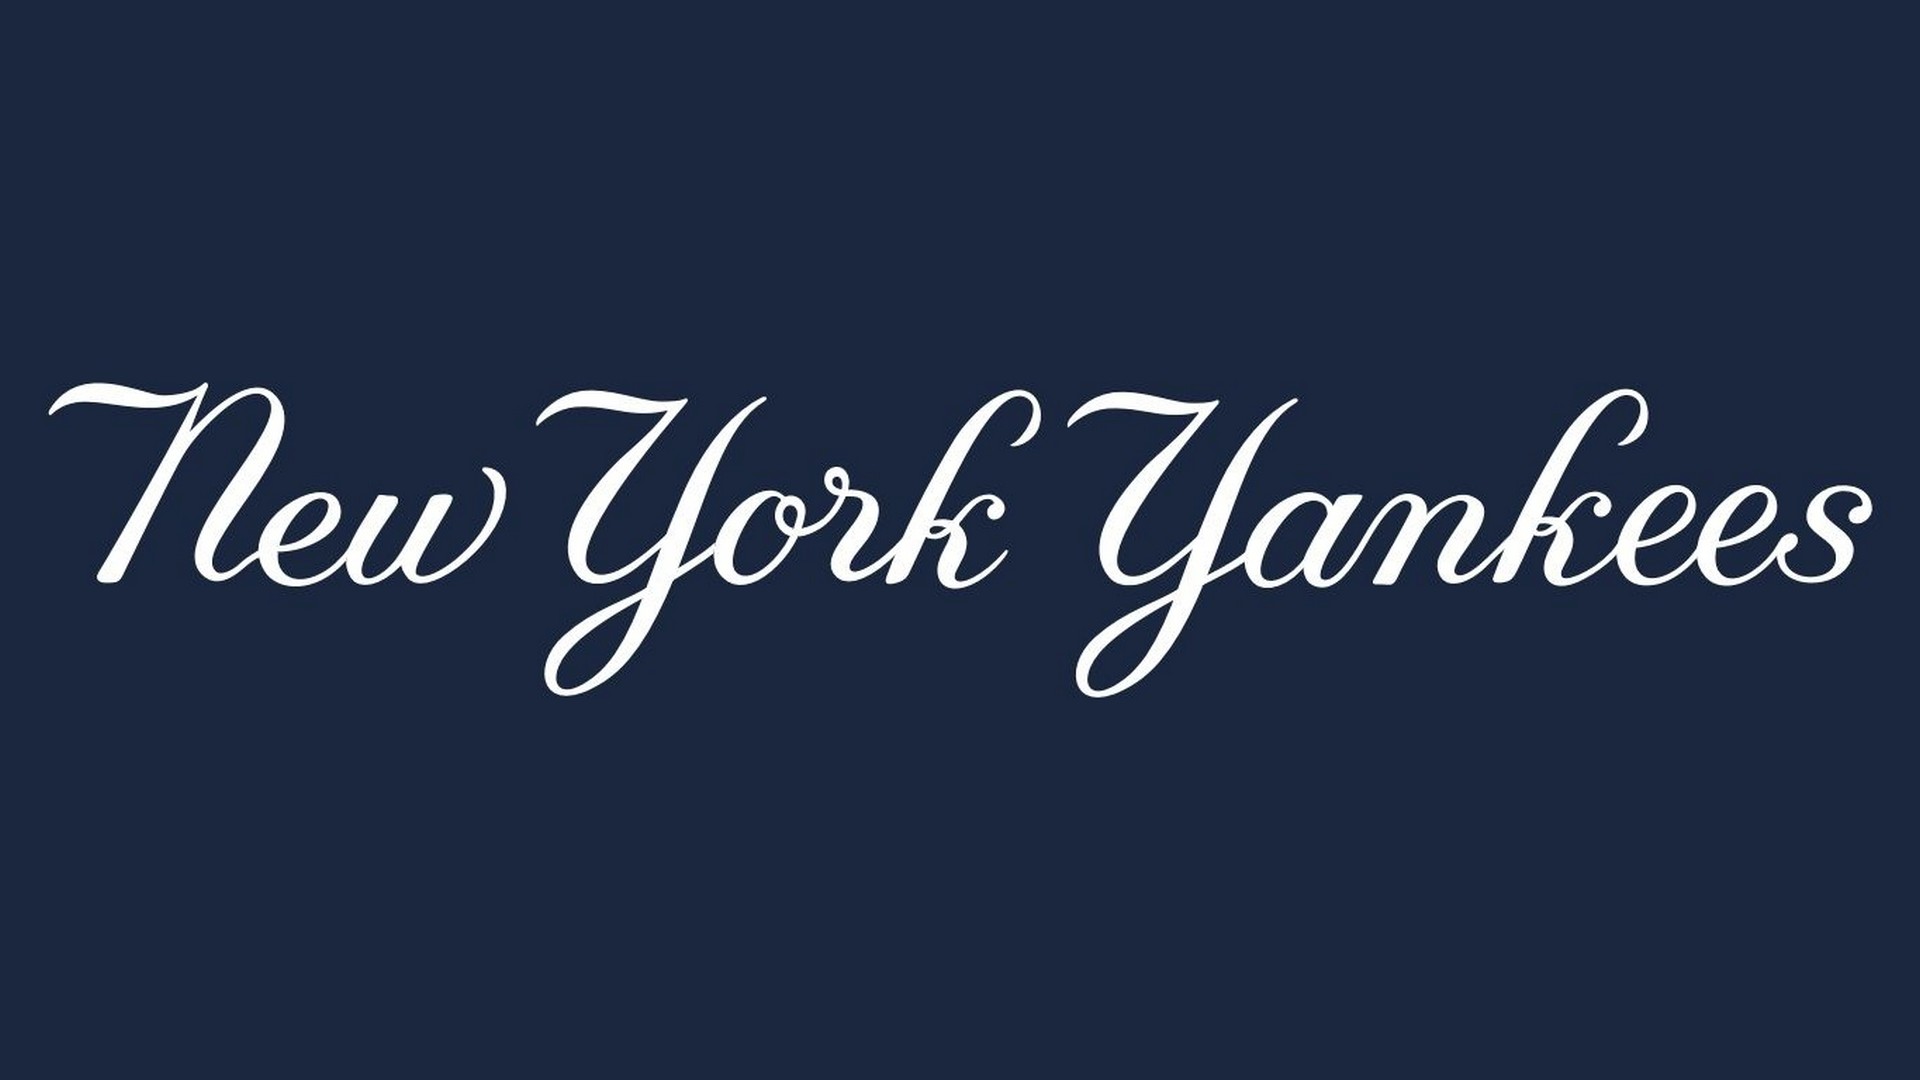 Wallpaper Desktop New York Yankees HD with high-resolution 1920x1080 pixel. You can use this wallpaper for Mac Desktop Wallpaper, Laptop Screensavers, Android Wallpapers, Tablet or iPhone Home Screen and another mobile phone device